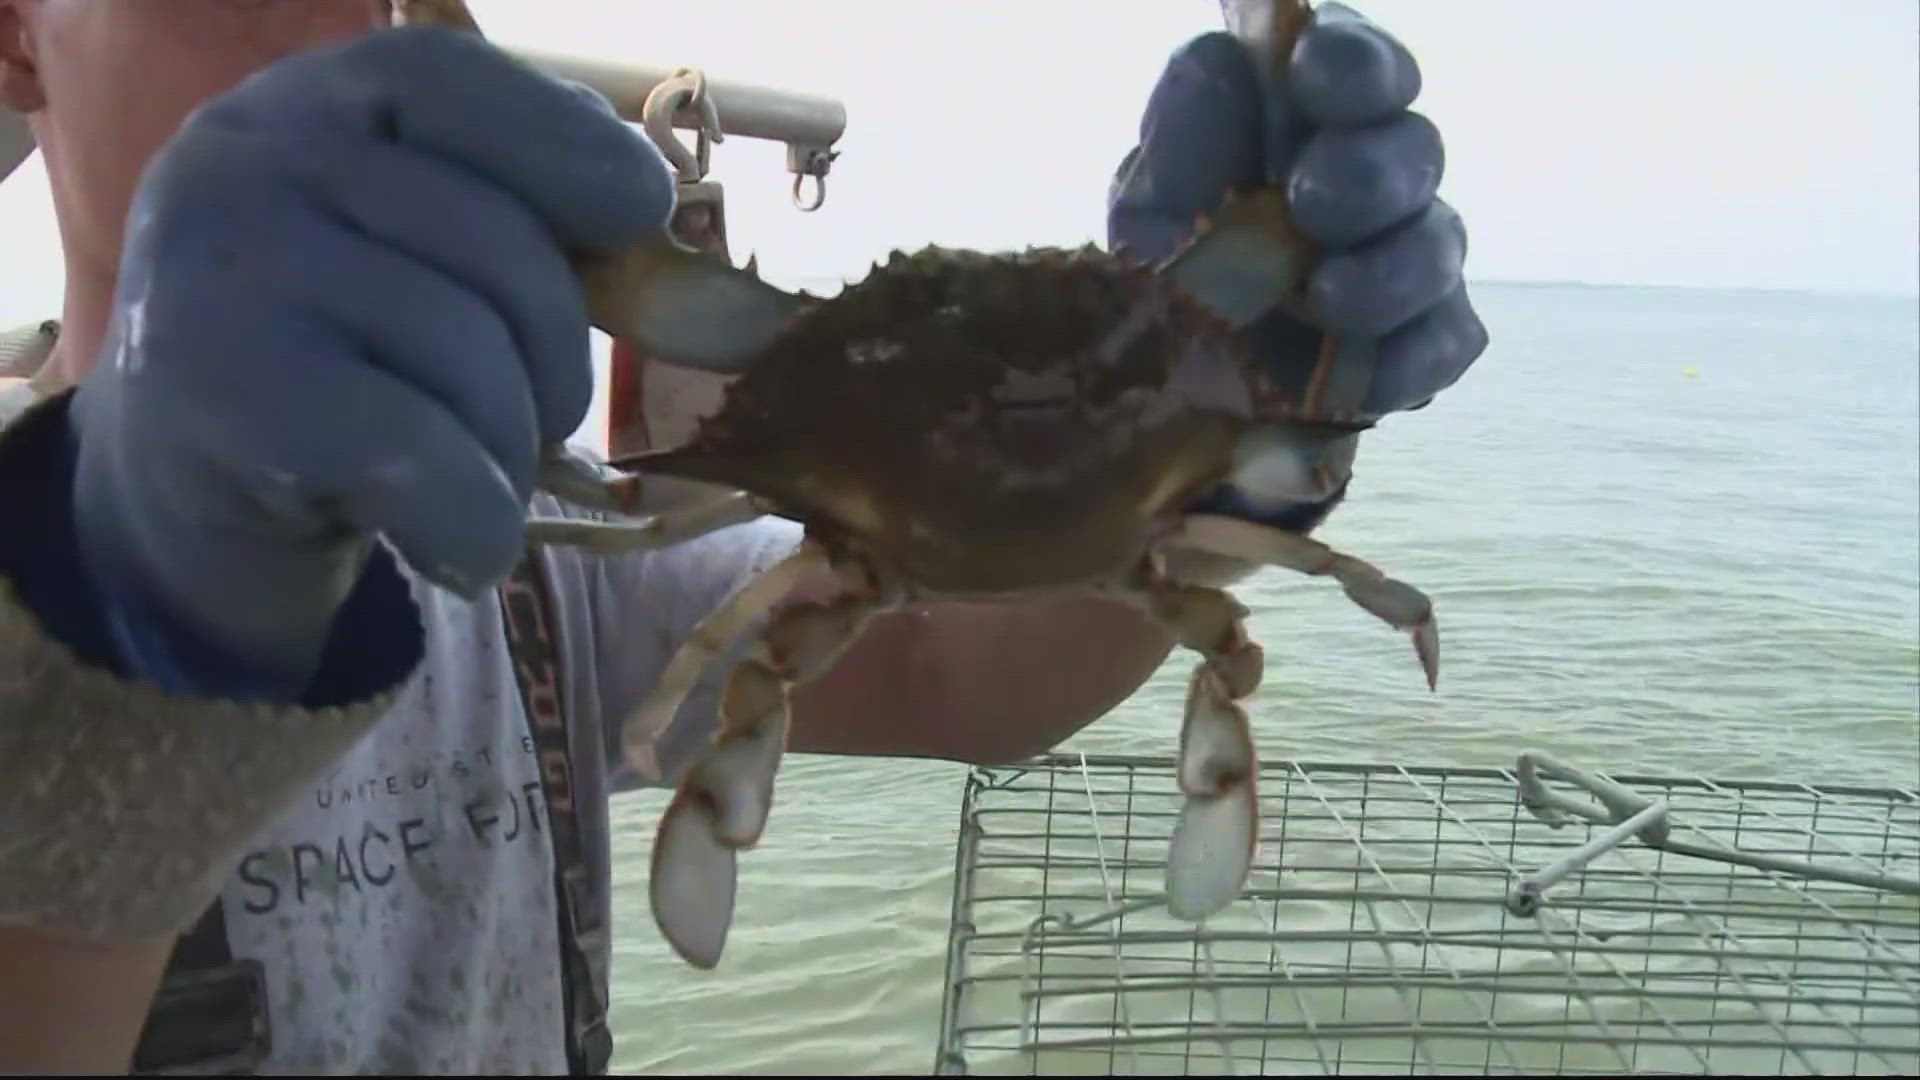 Wildlife officials tracking the crab population in Maryland say a new survey shows crabs on the comeback trail following last year's low numbers.